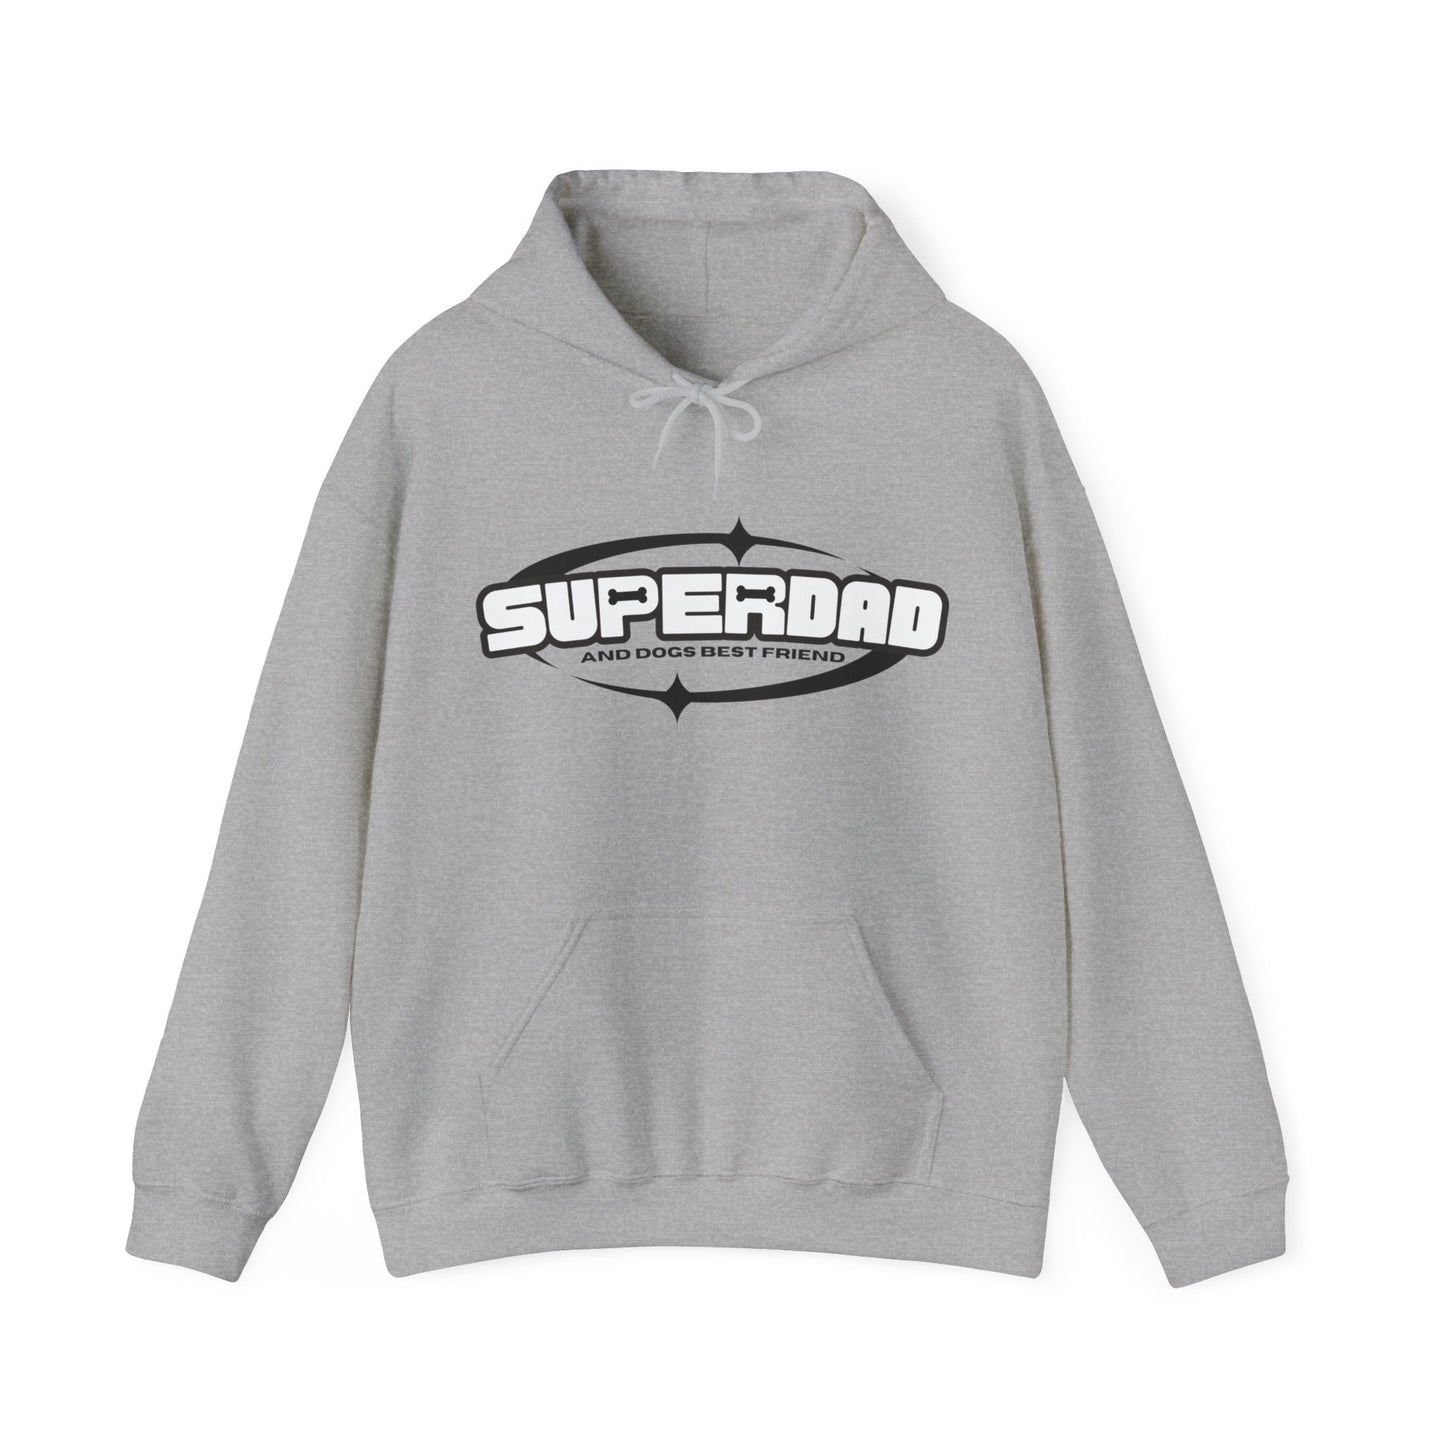  On a white background lies a 'Superdad' unisex sport grey sweatshirt by Dogs Pure Love.